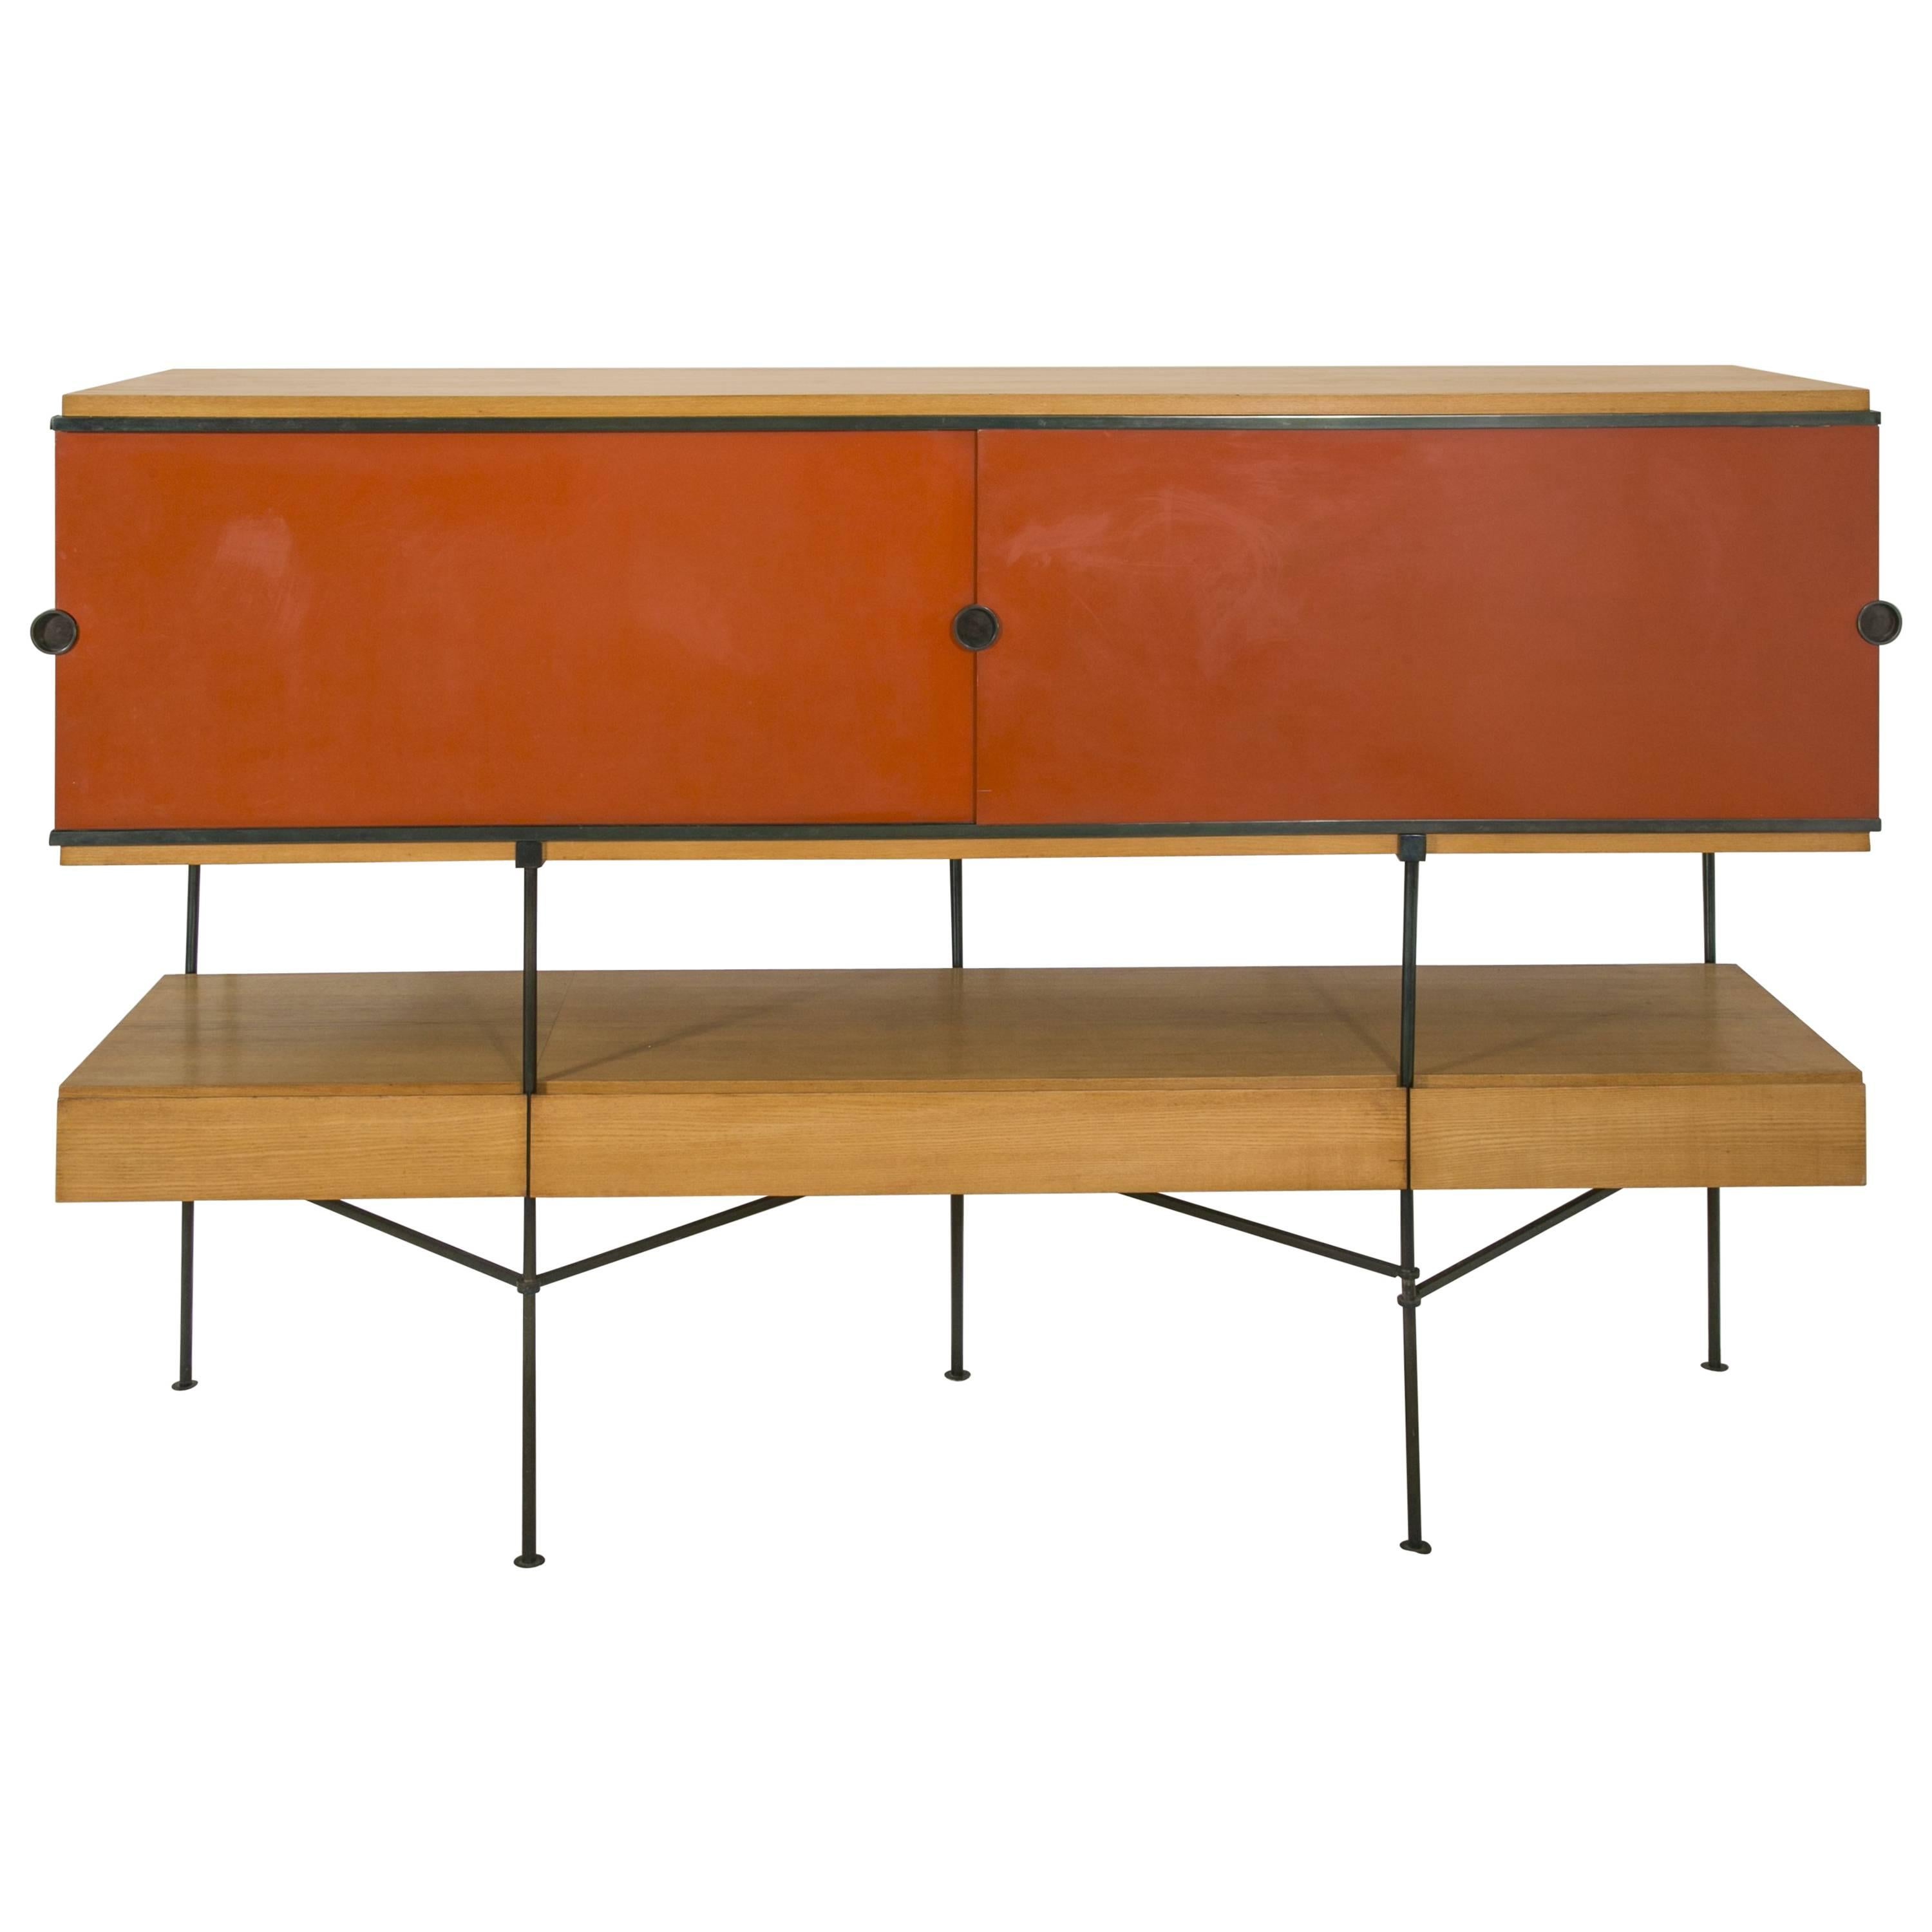 Maxime Old, Sideboard Composed by Two Parts, 1956